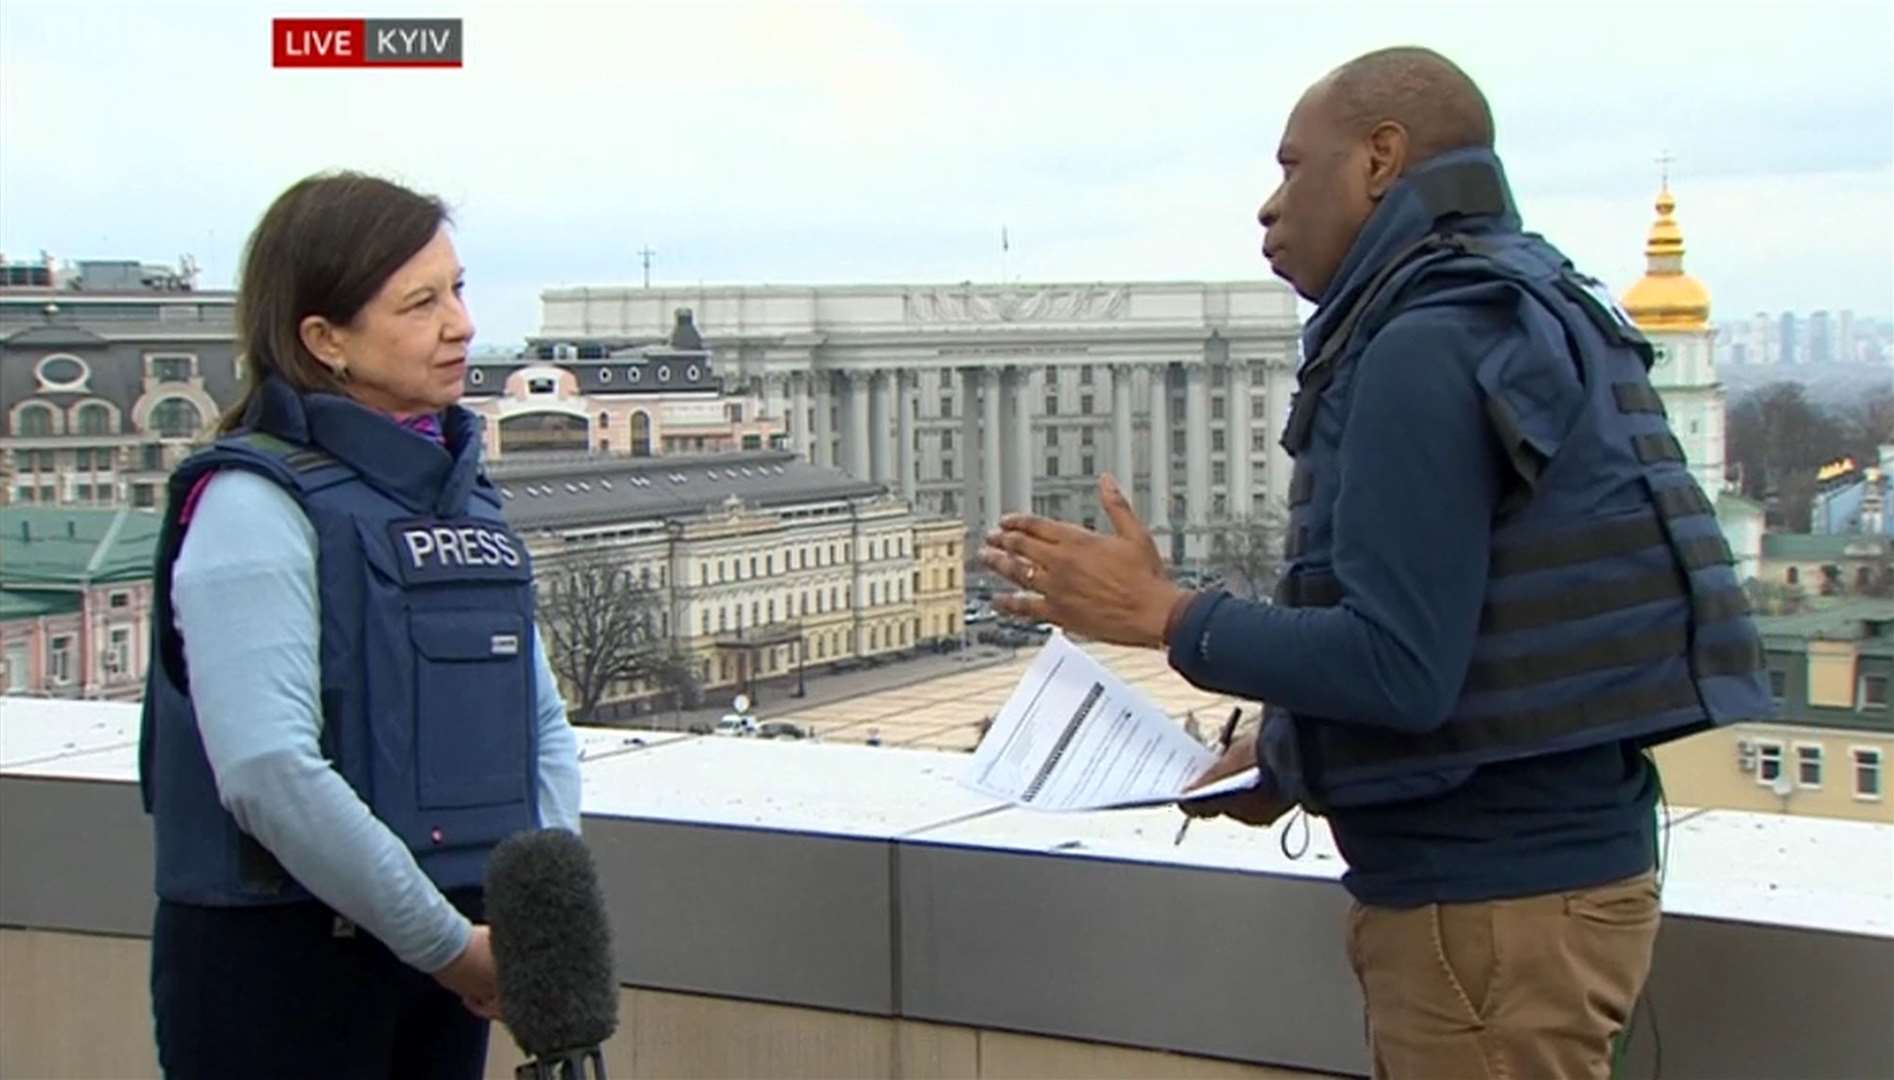 Clive Myrie and Lyse Doucet wearing flak jackets during a broadcast from Kyiv in Ukraine (BBC)